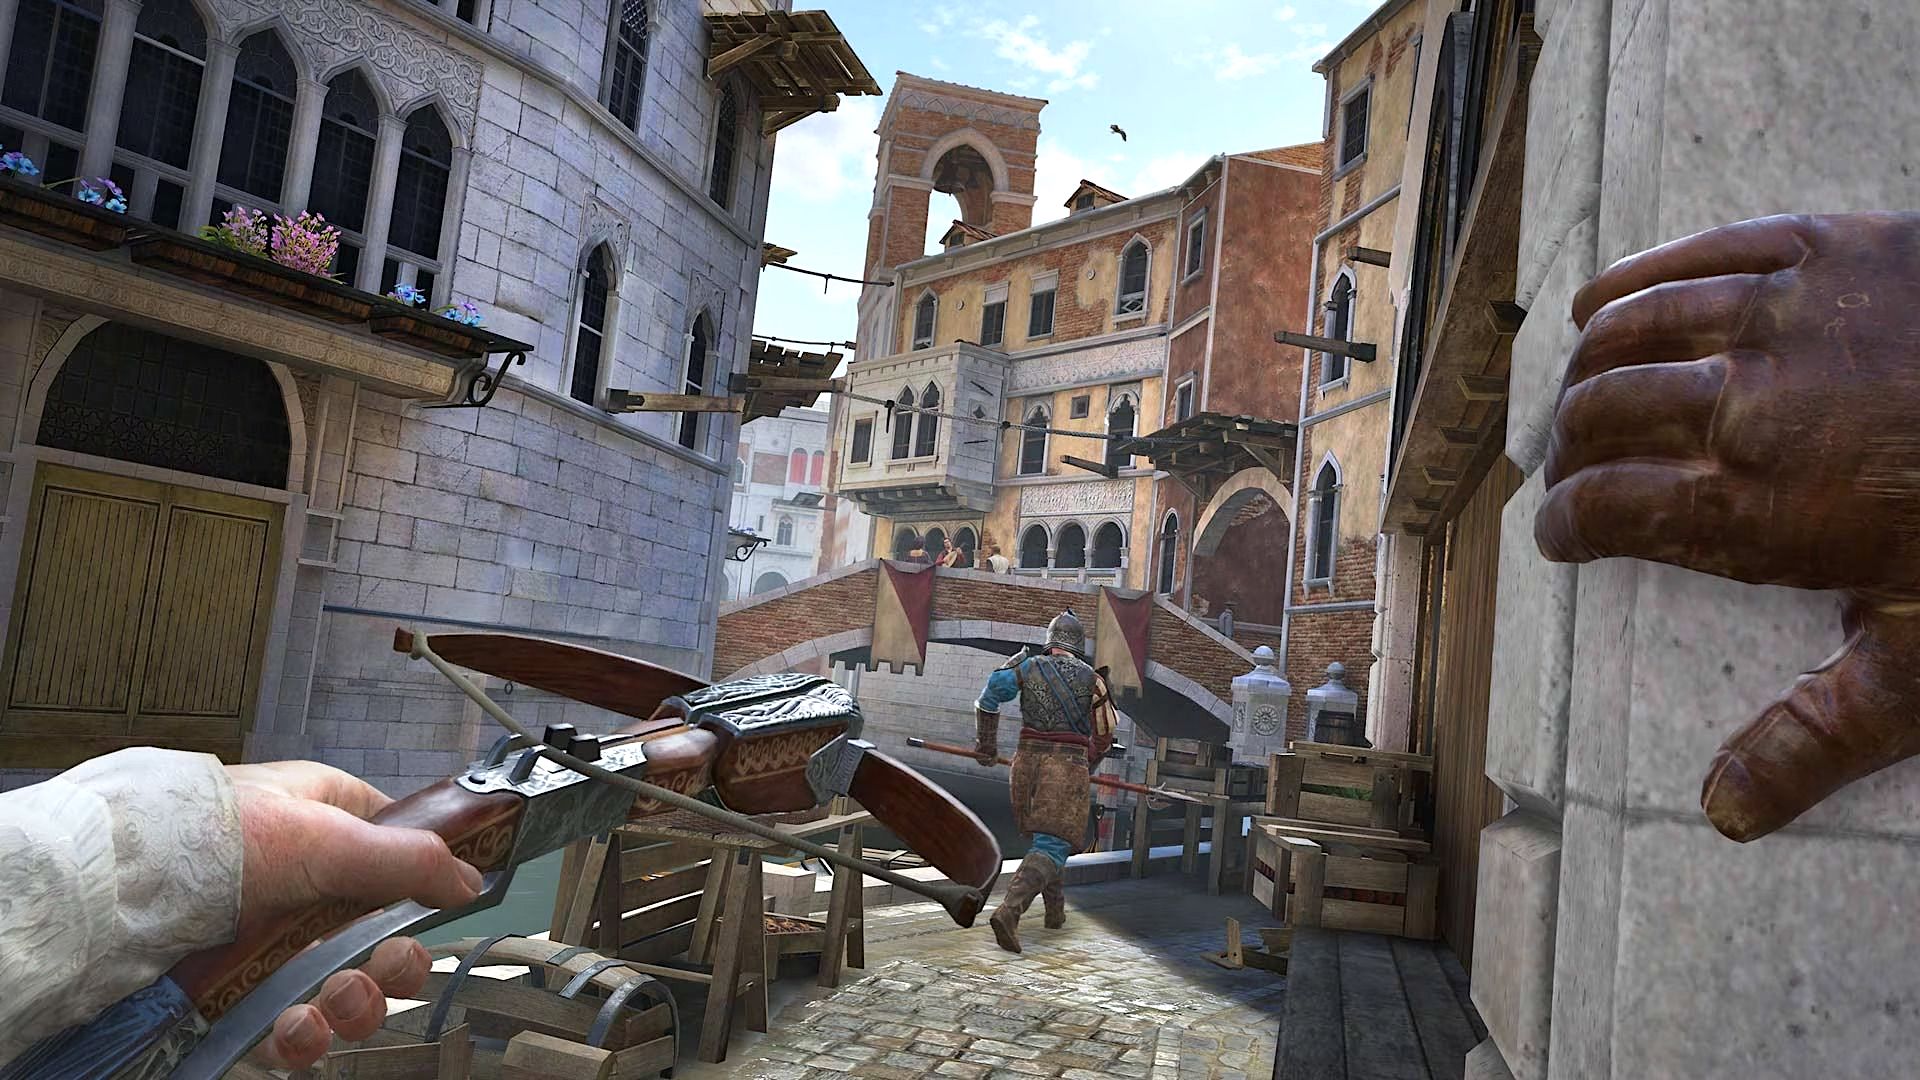 Assassin S Creed Nexus Vr Looks Really Good In First Gameplay Trailer